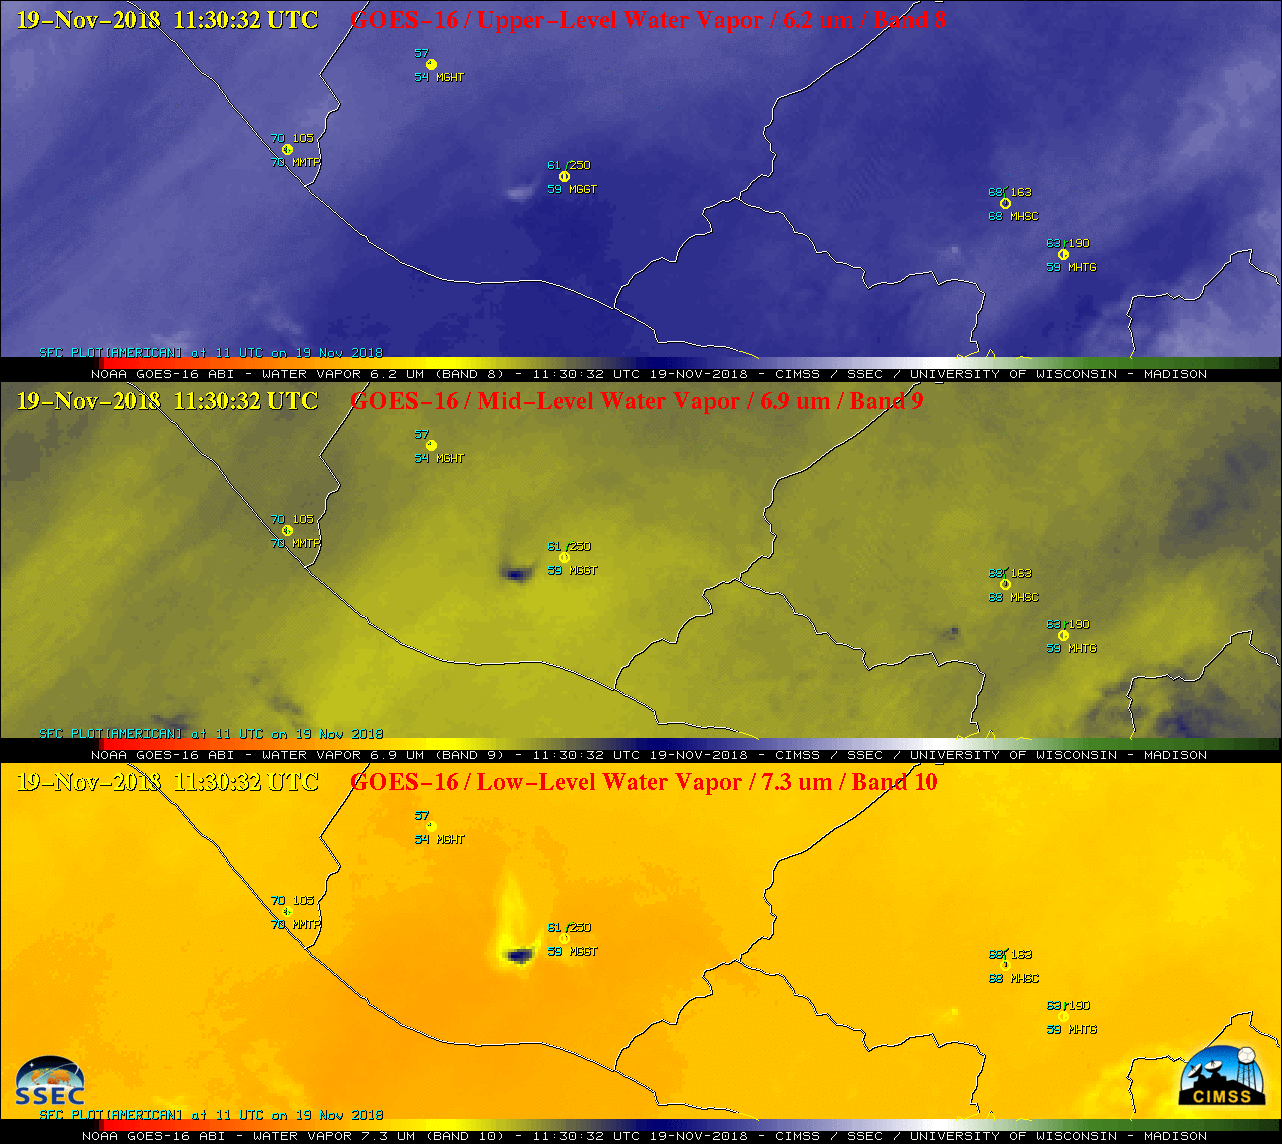 GOES-16 Upper-level (6.2 µm, top), Mid-level (6.9 µm, center) and Low-level (7.3 µm, bottom) Water Vapor images [click to play animation | MP4]